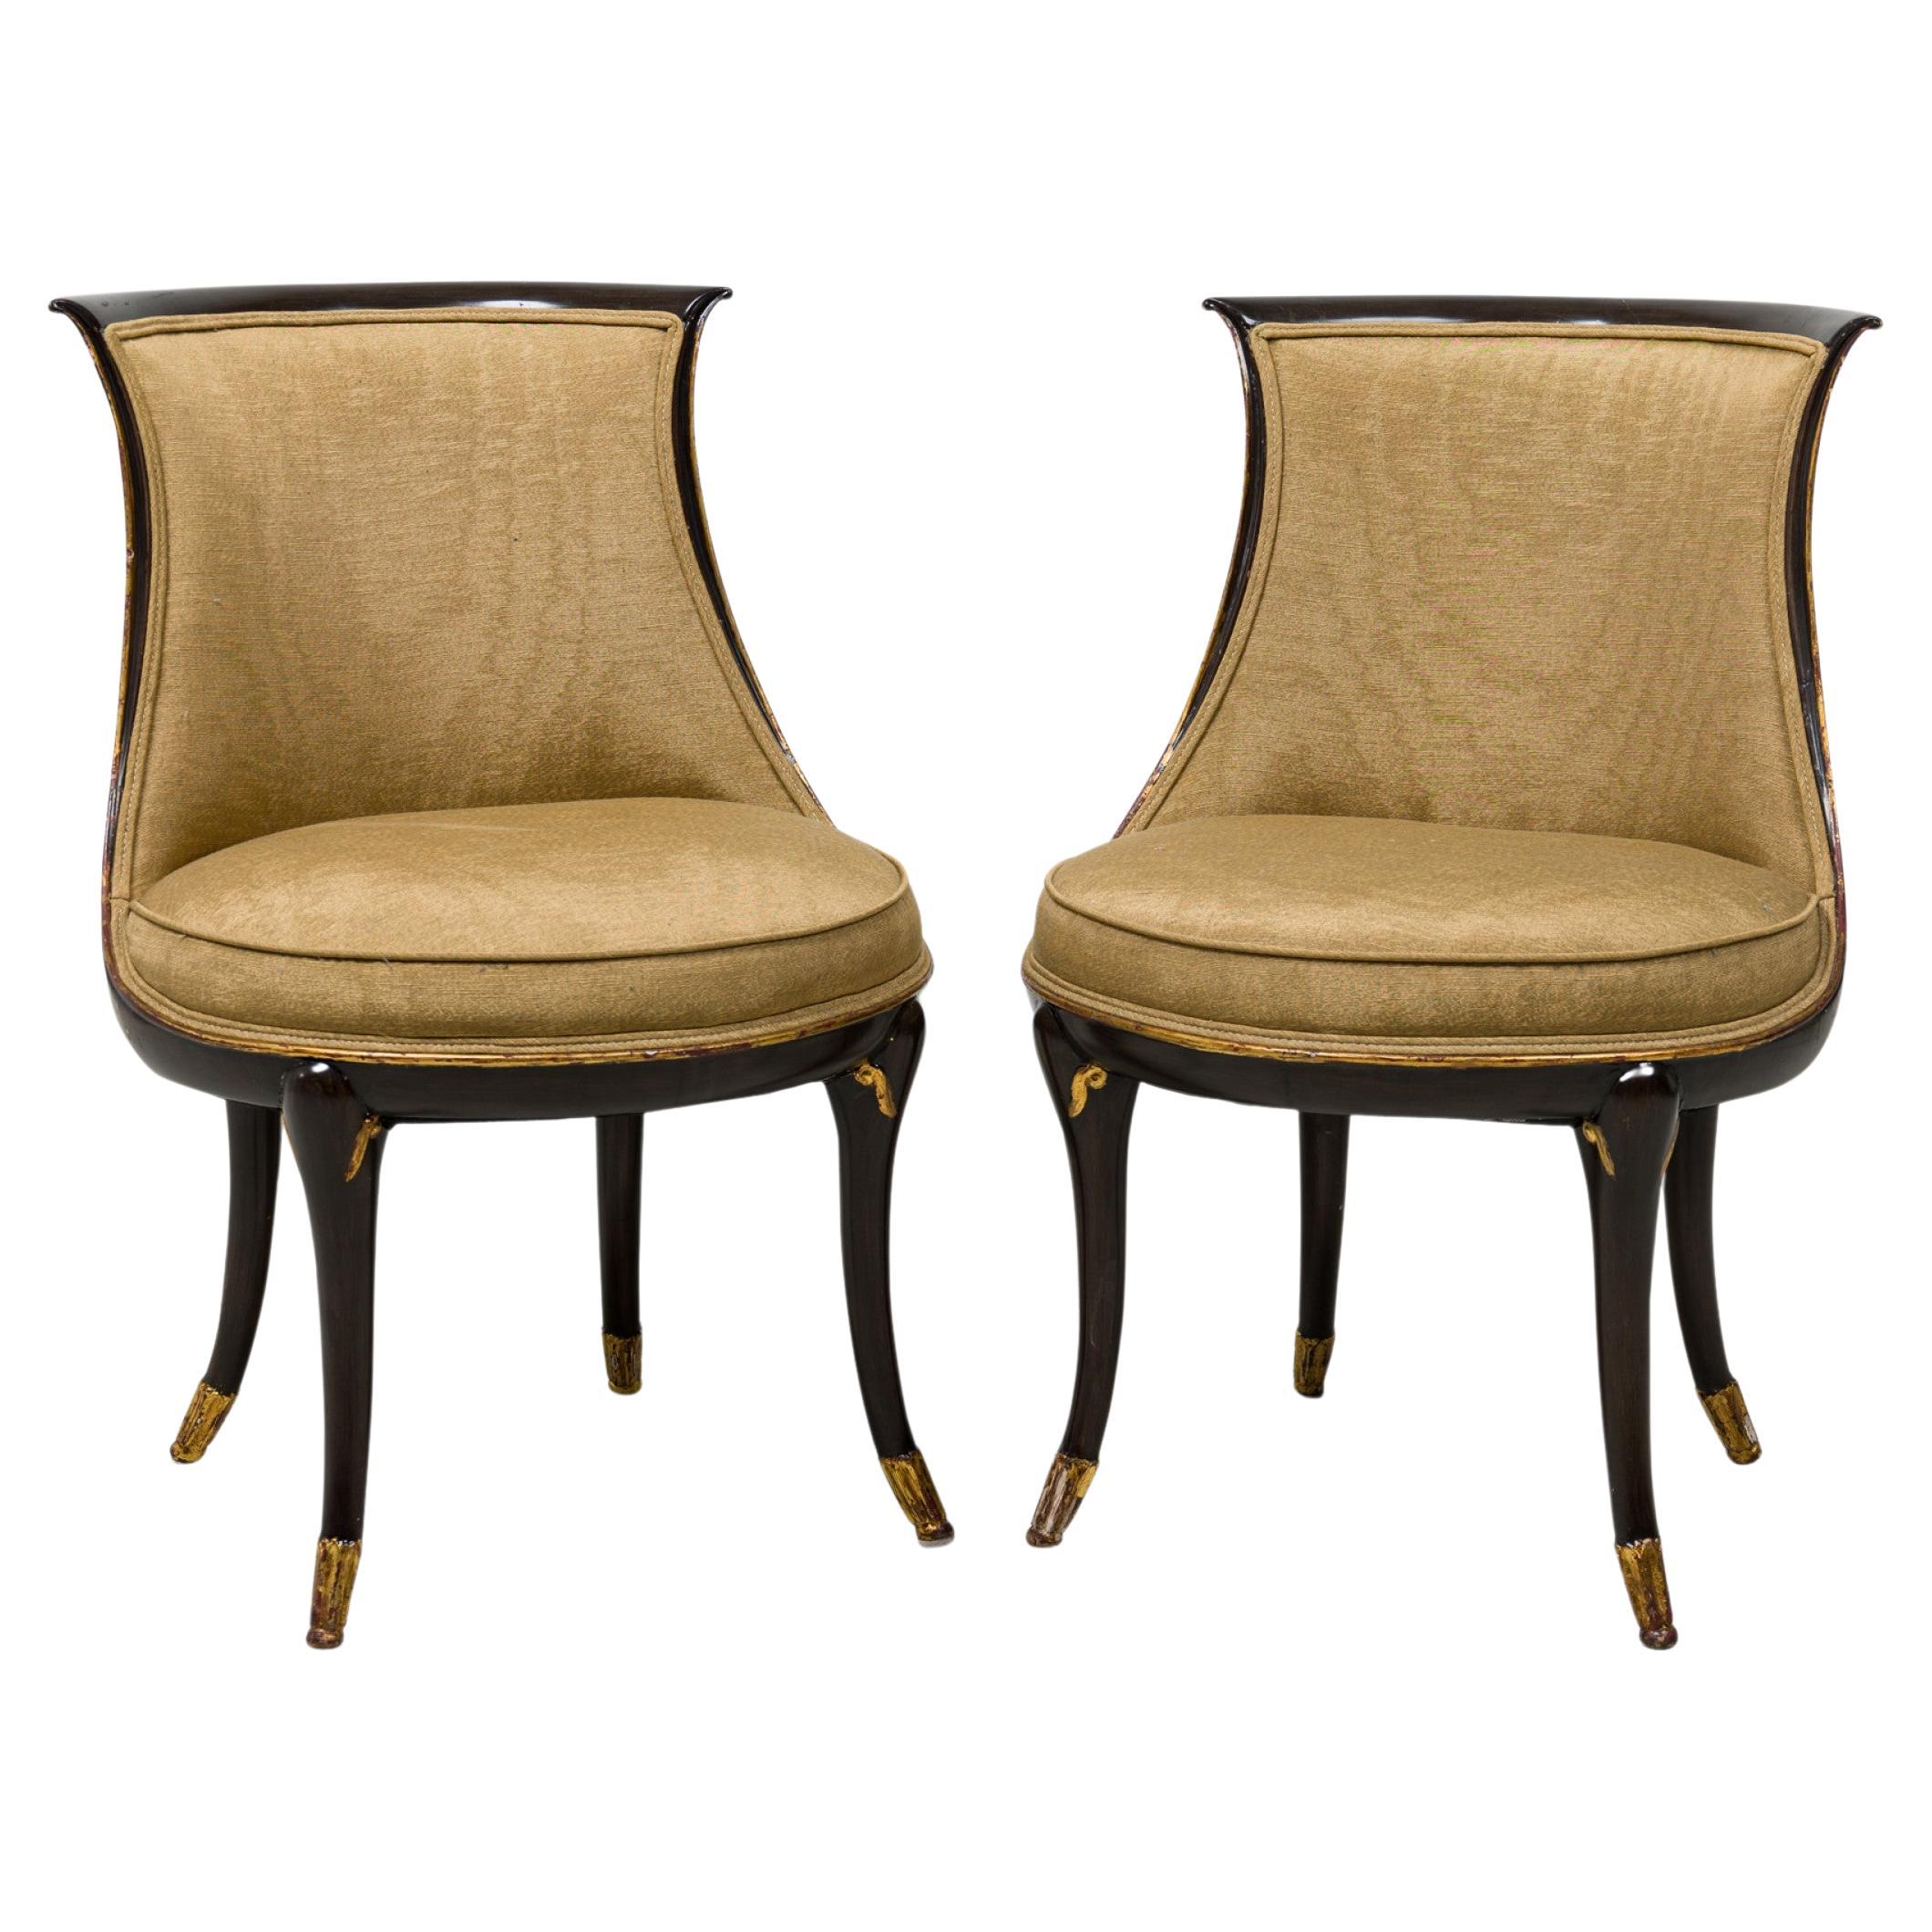 Set of 4 Michael Taylor American Walnut & Brass Inlaid Upholstered Dining Chairs